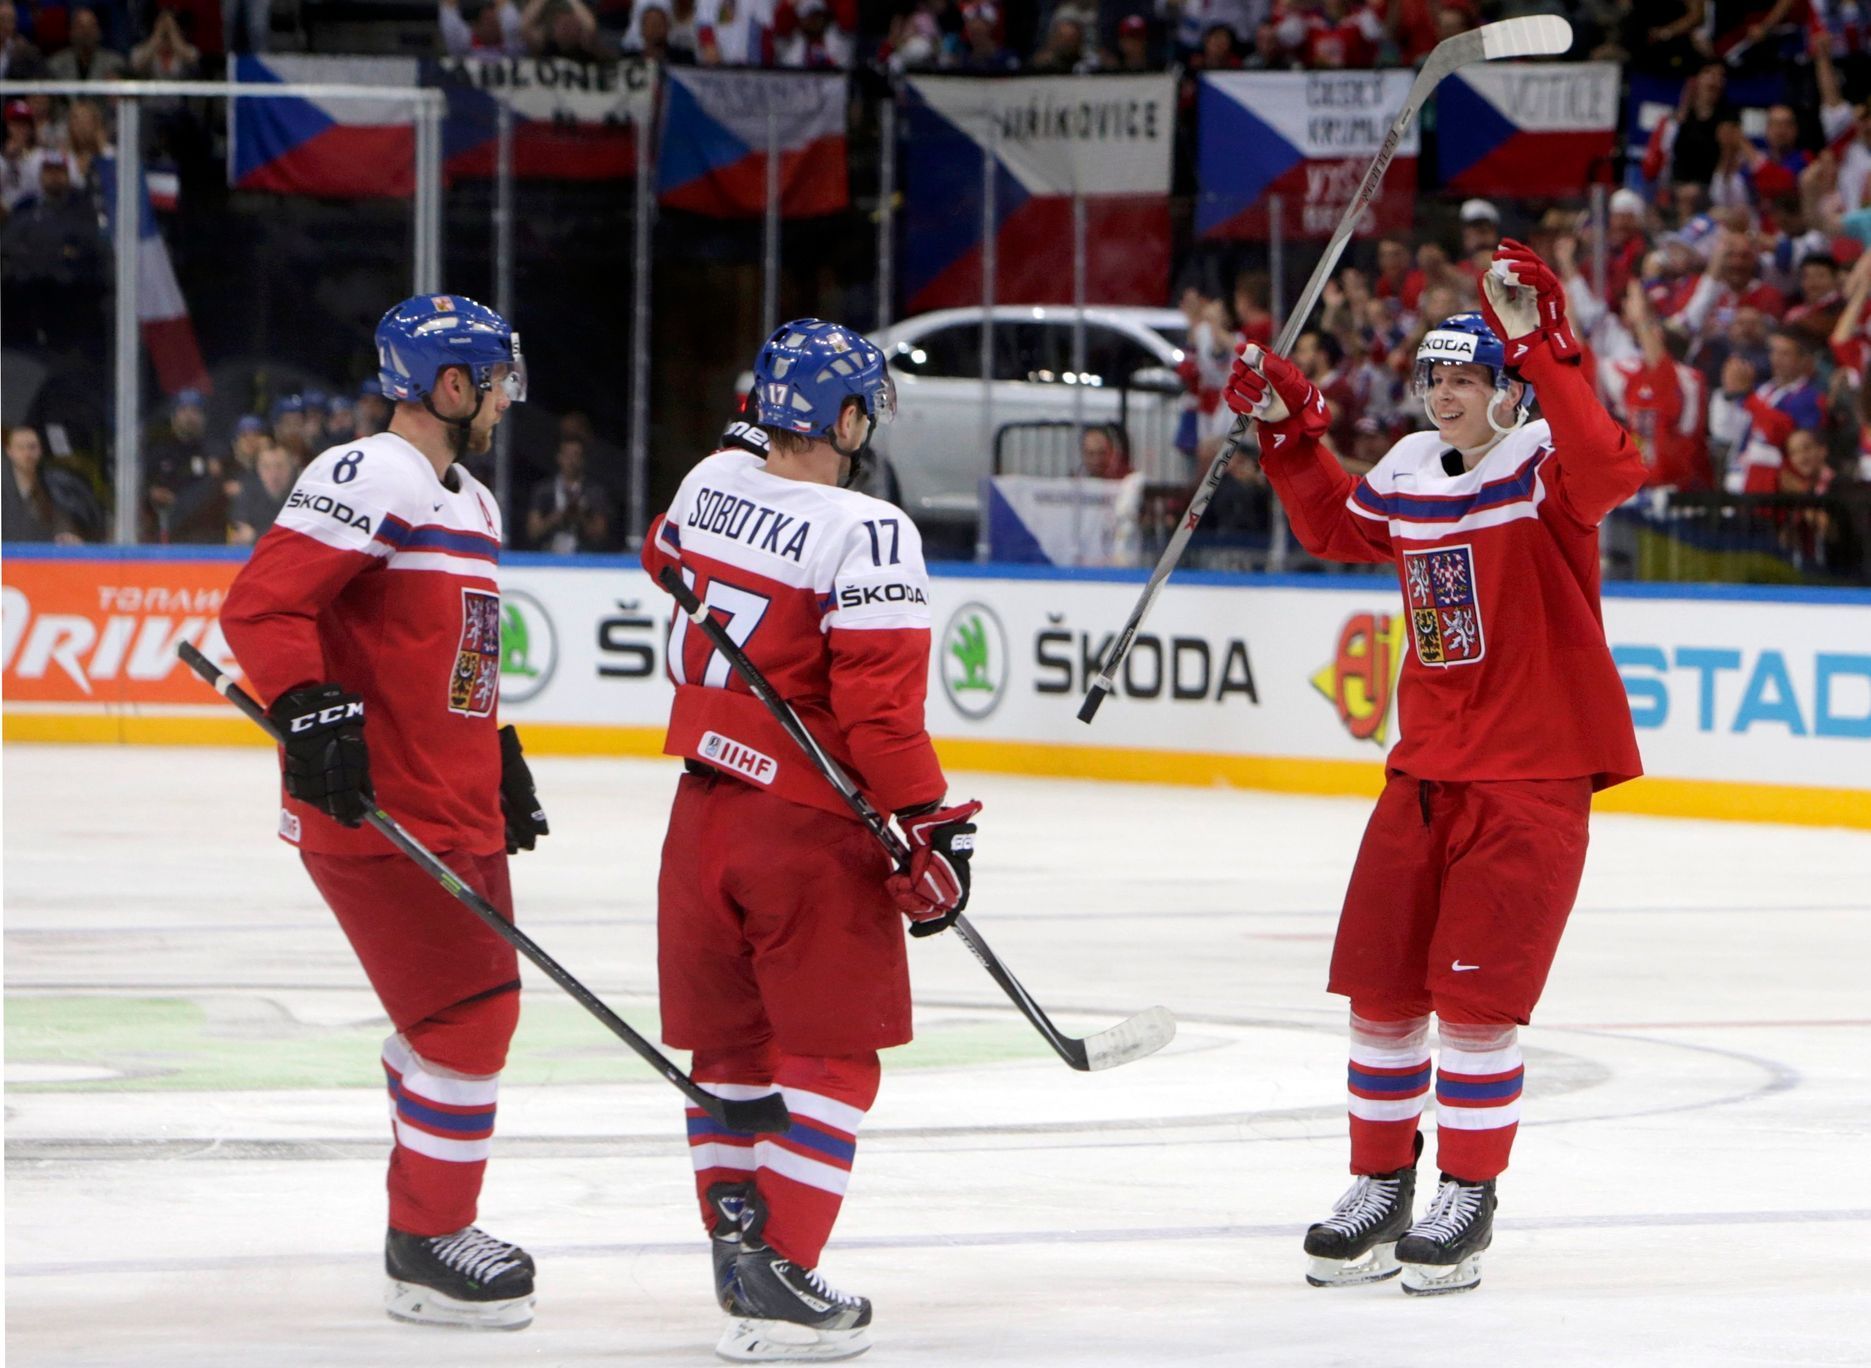 Sobotka of the Czech Republic celebrates his goal with team mates Hejda and Krejcik during their Ice Hockey World Championship game against France in Prague